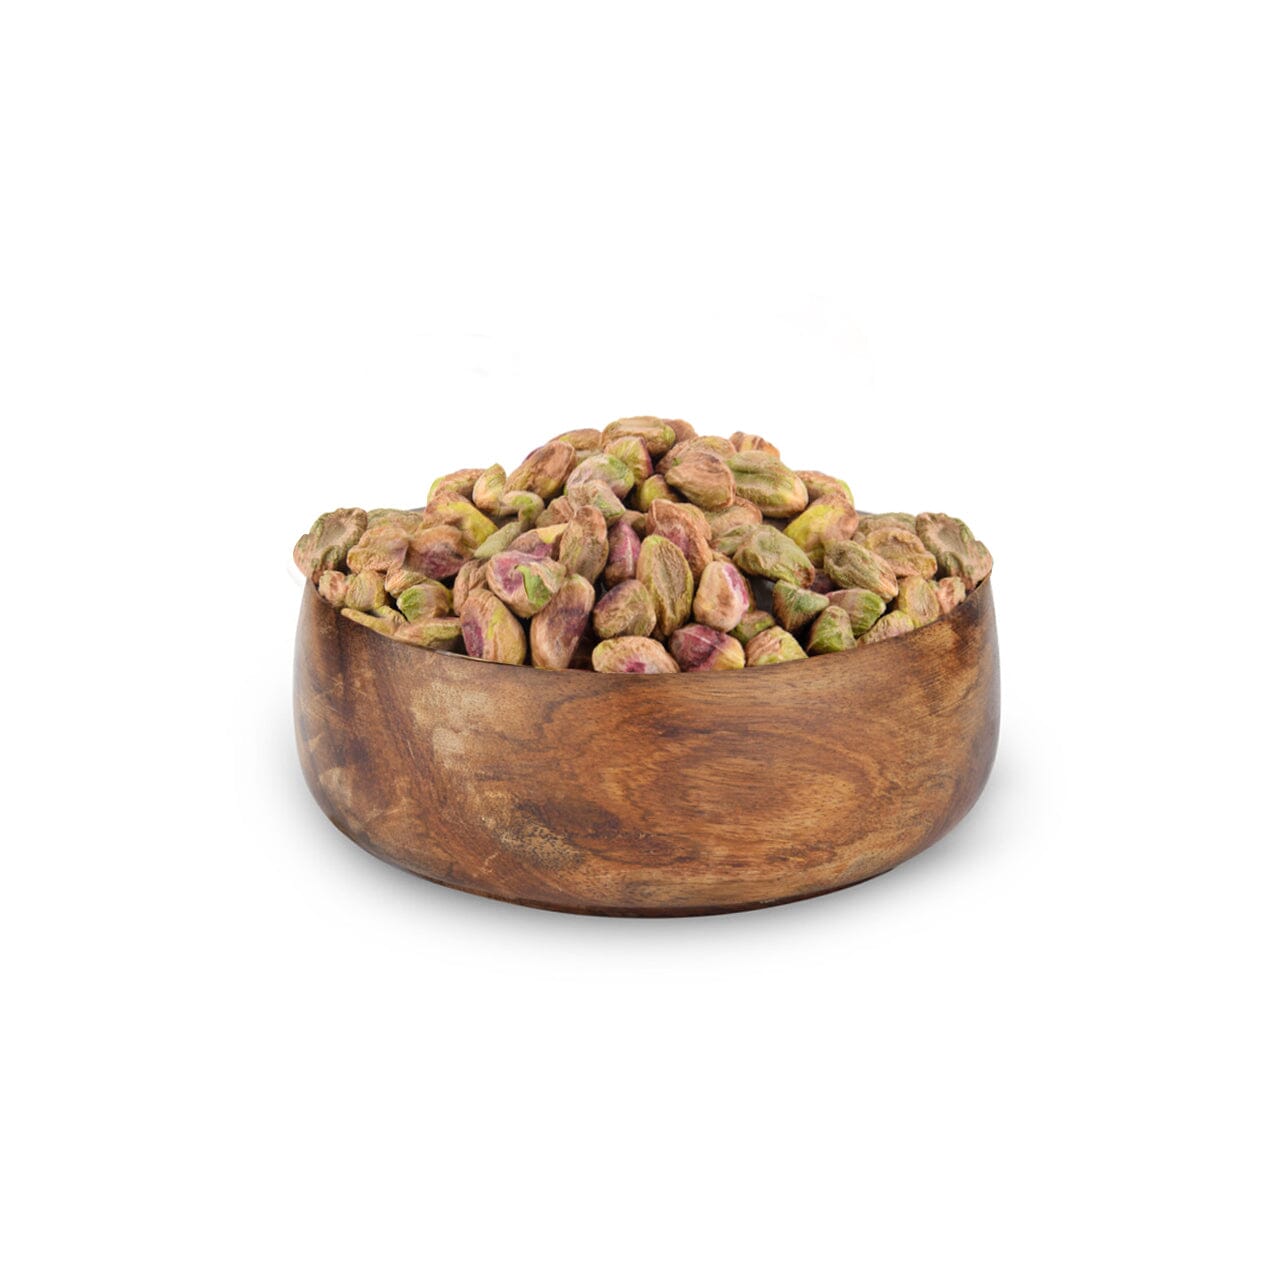 Organic Pista Without Skin Salted - 100 Gms - Kedia Organic Agro Farms Nuts & Dryfruits Kedia Organic Agro Farms 